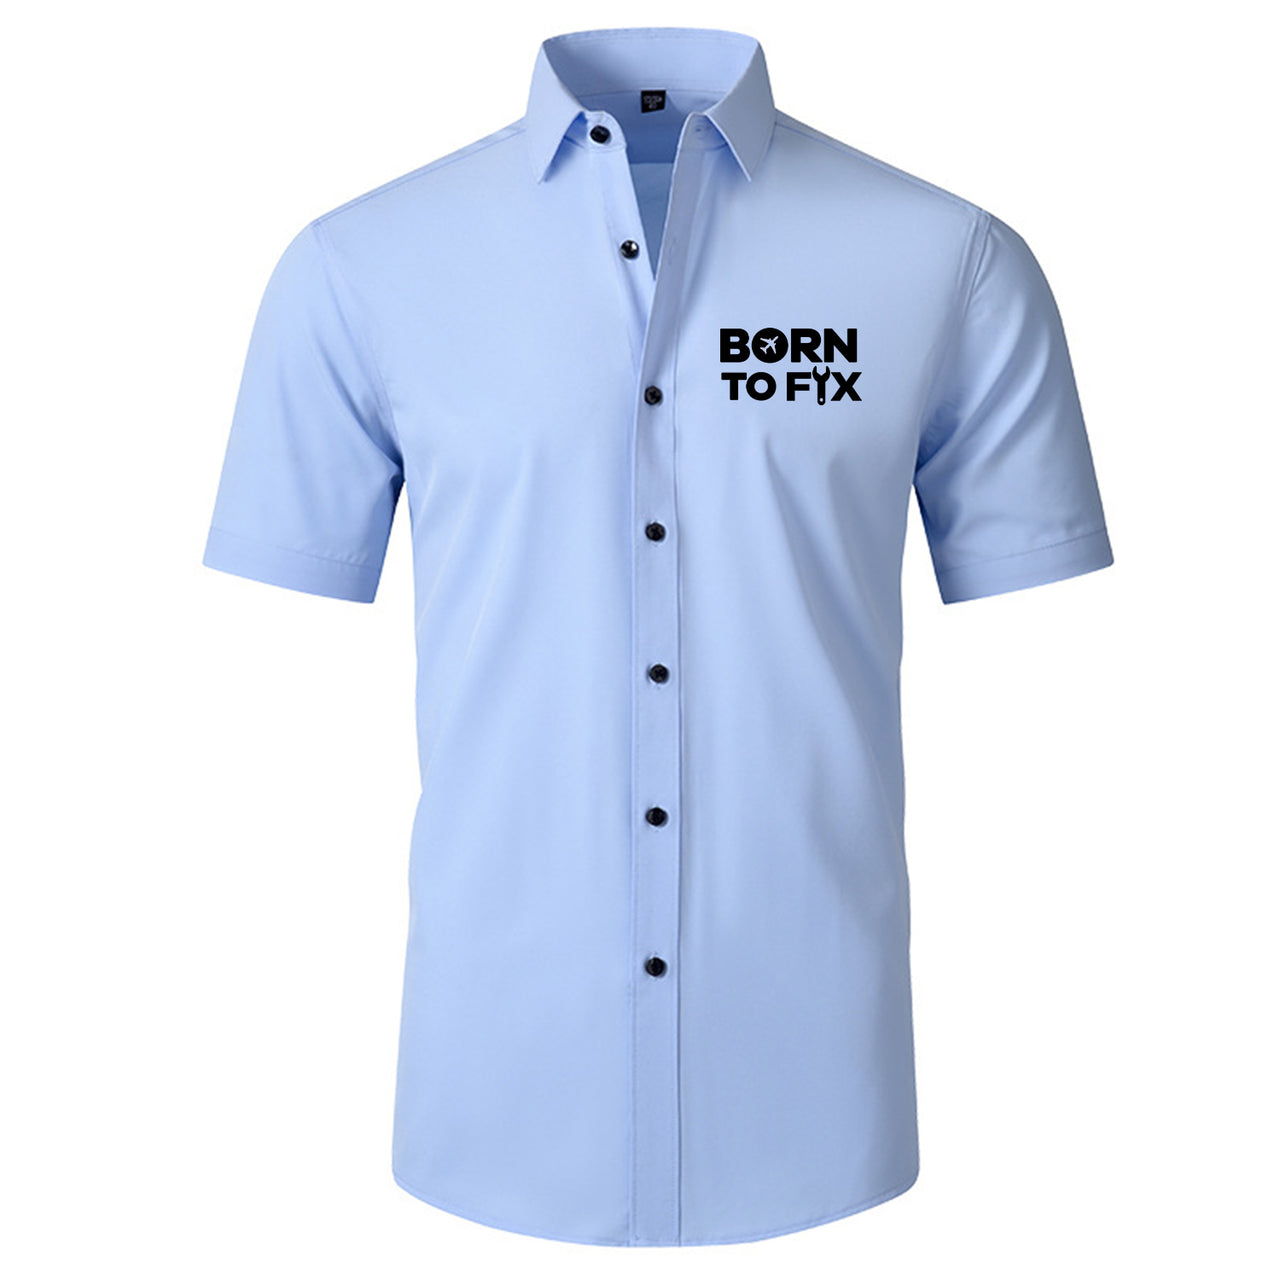 Born To Fix Airplanes Designed Short Sleeve Shirts